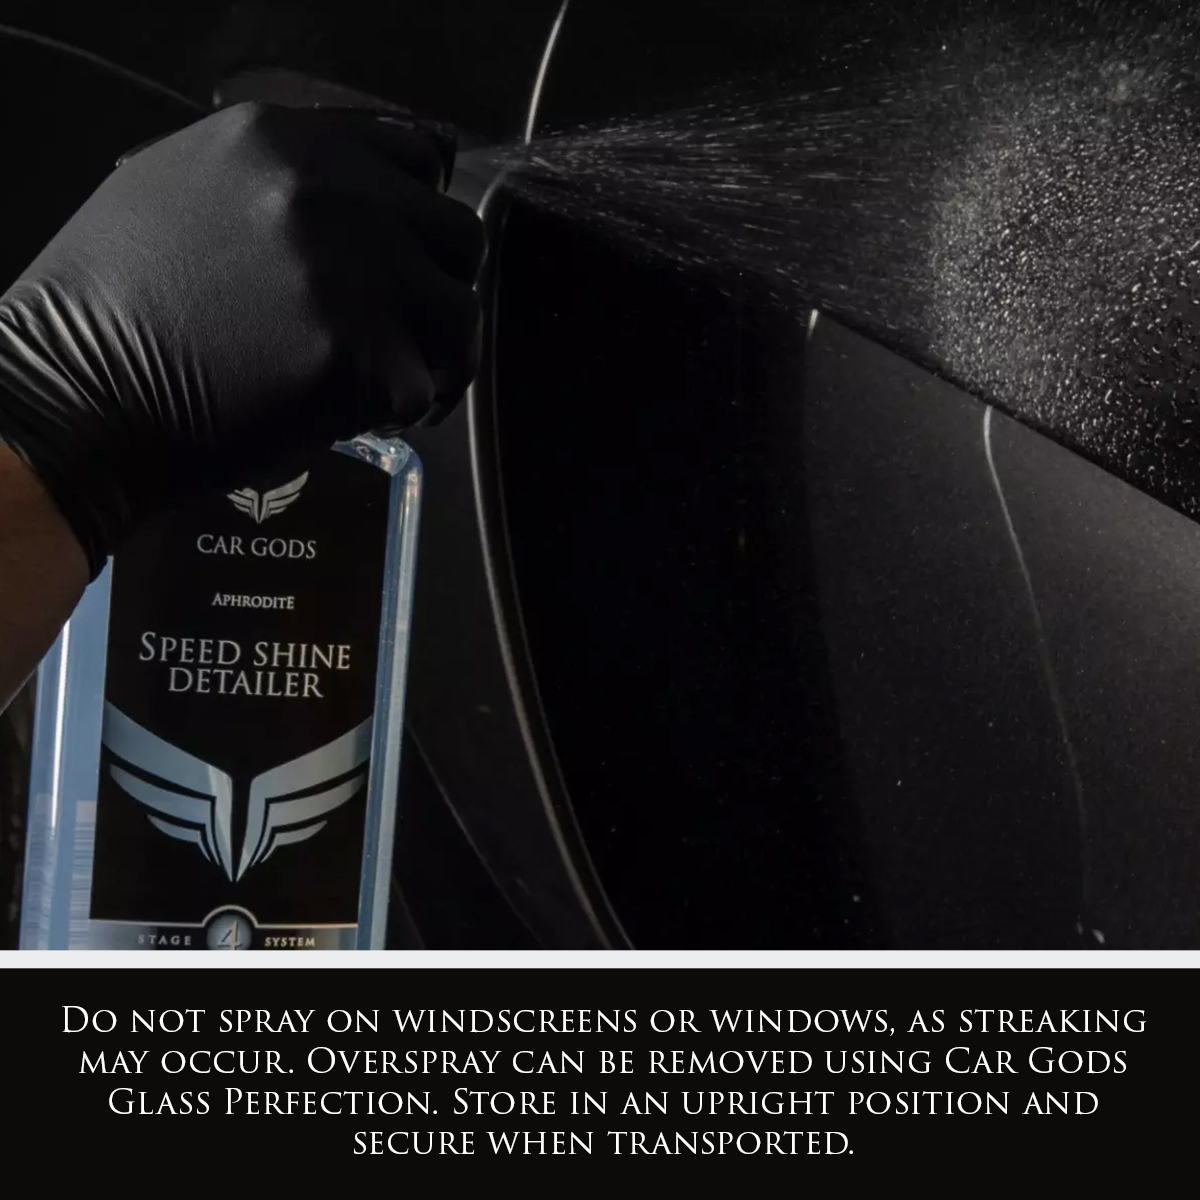 Image shows Car Gods Speed Shine Detailer being sprayed onto a black car panel. Text: Do not spray on windscreens or windows, as streaking may occur. Overspray can be removed using Car Gods Glass Perfection. Store in an upright position and secure when transported.